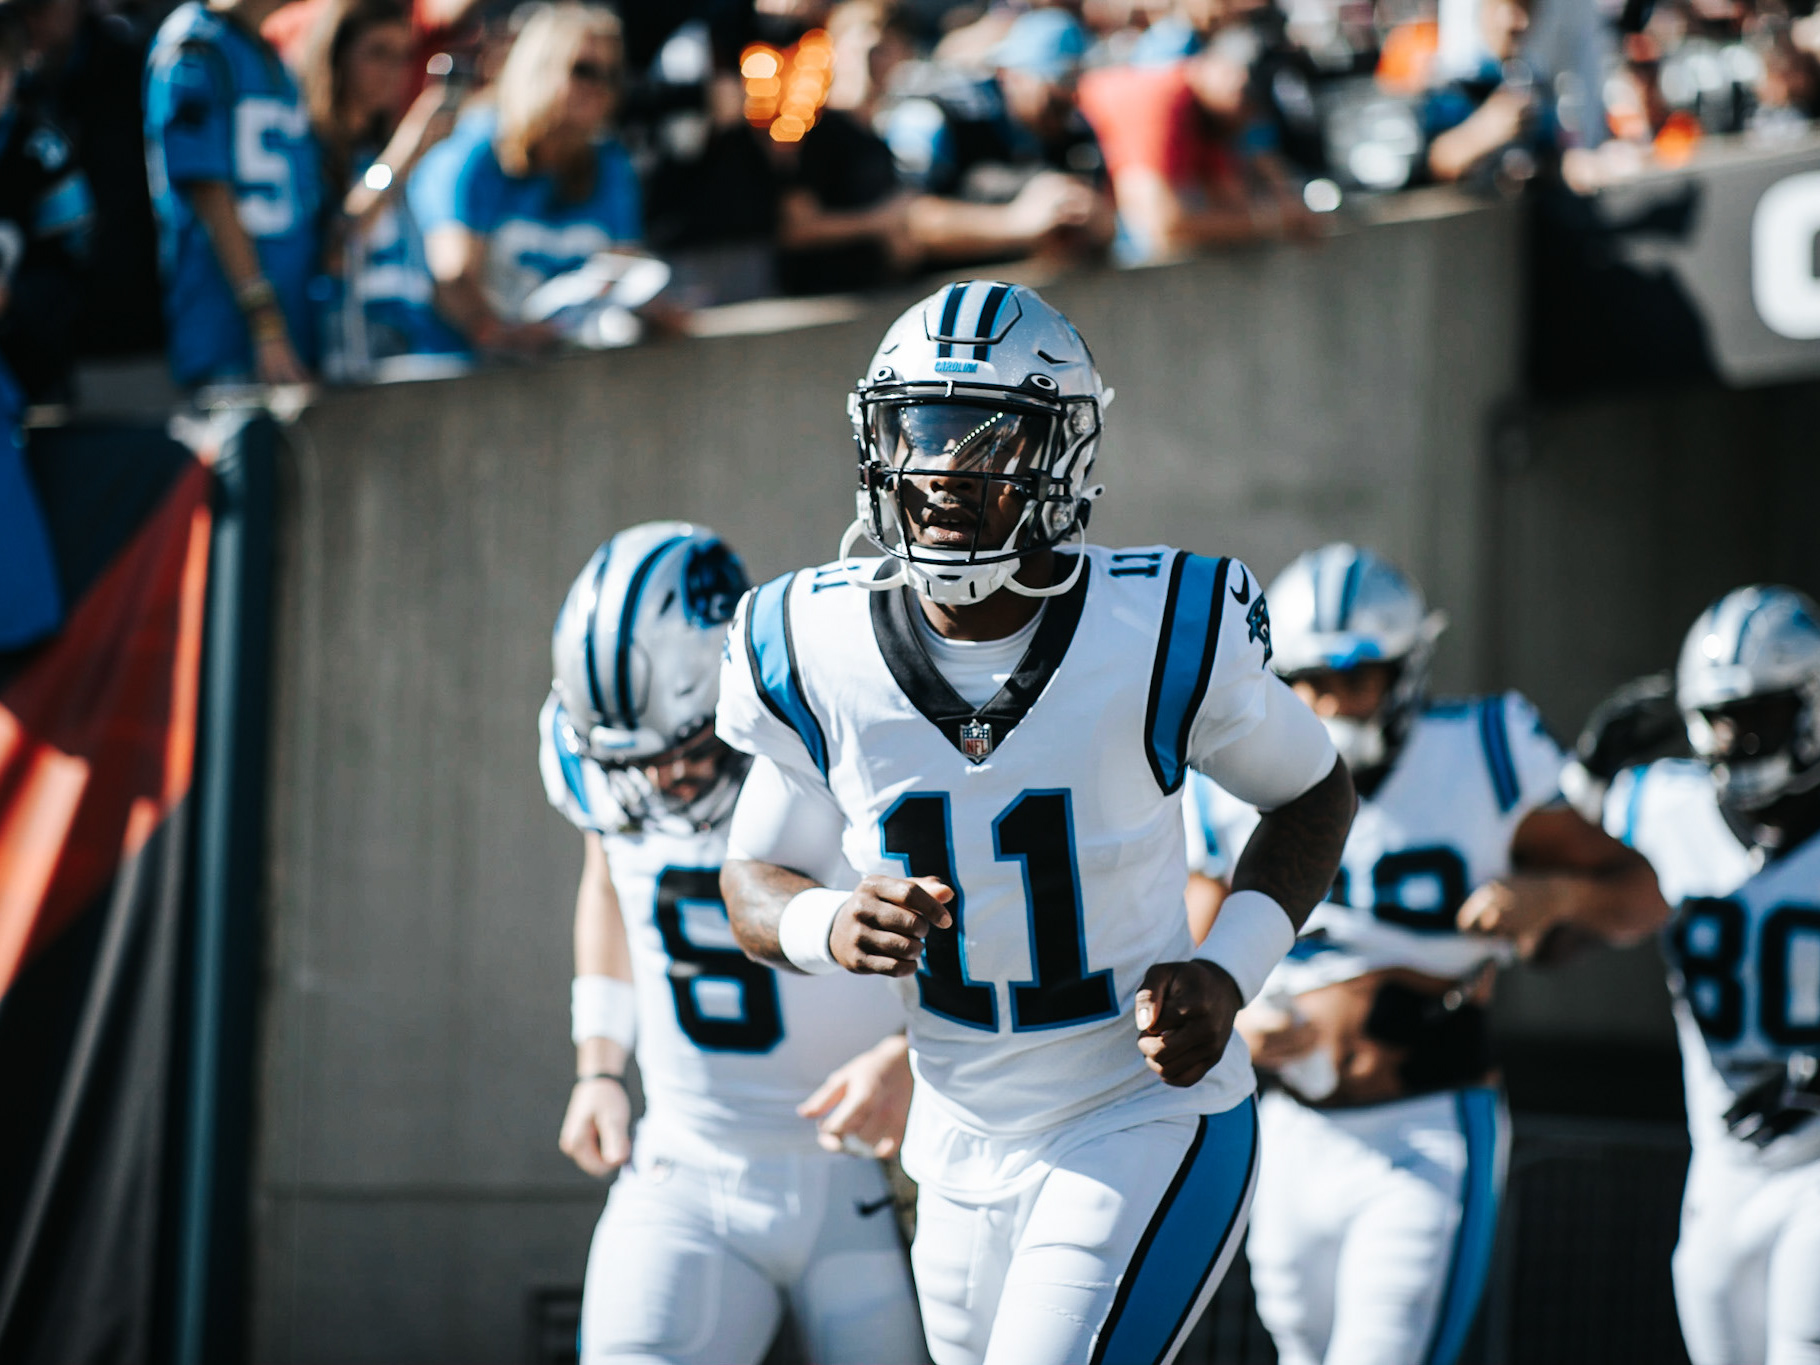 panthers all white uniforms